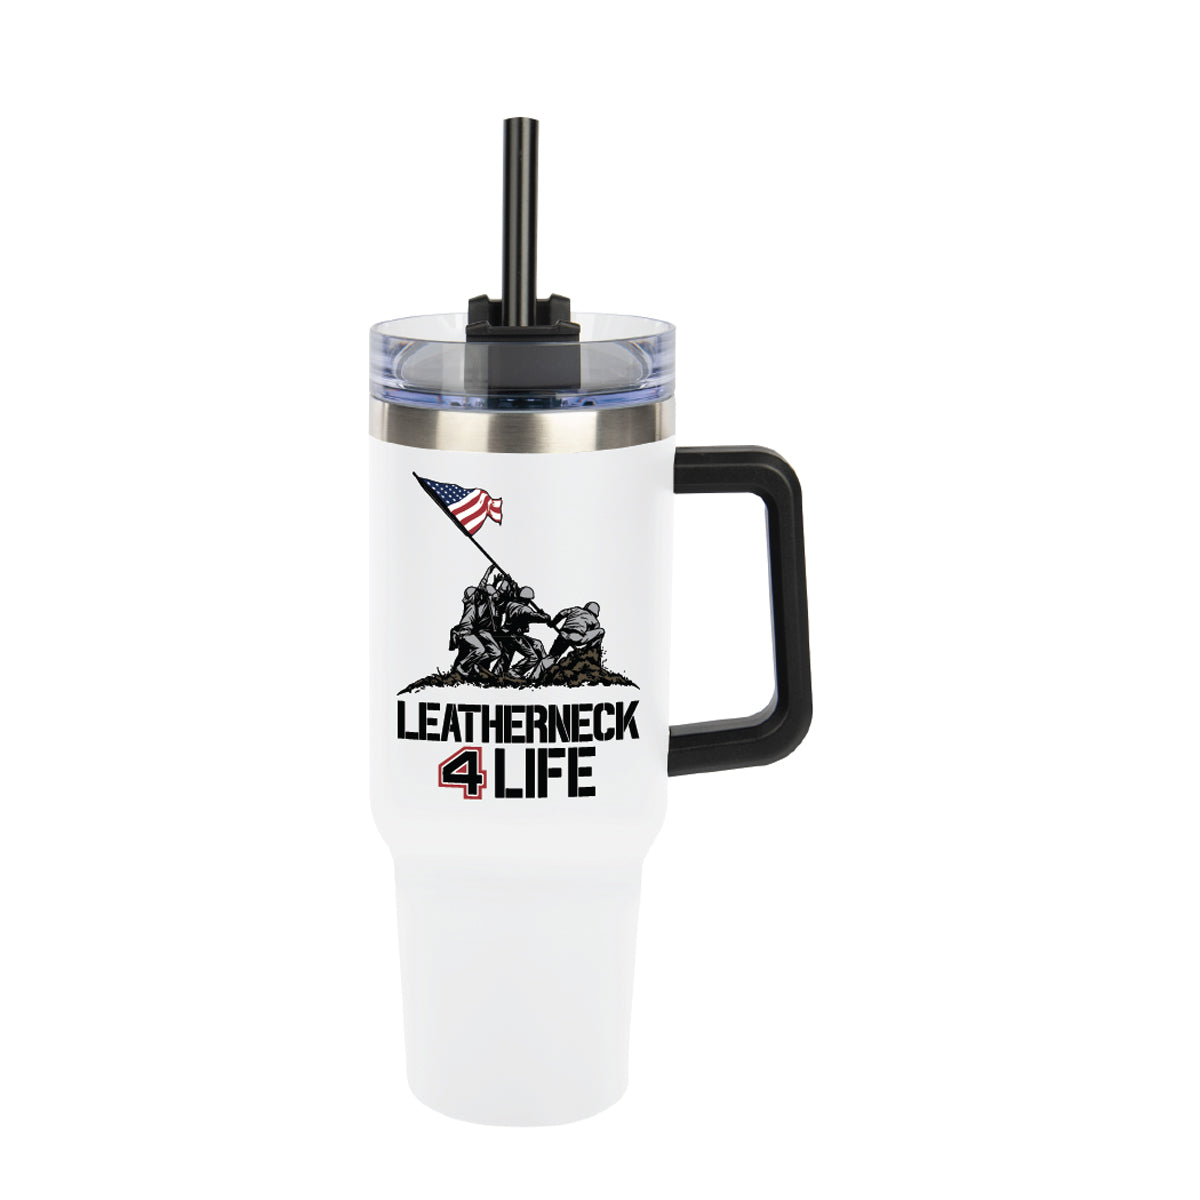 Leatherneck for Life 40 Oz. Stainless Steel Tumbler